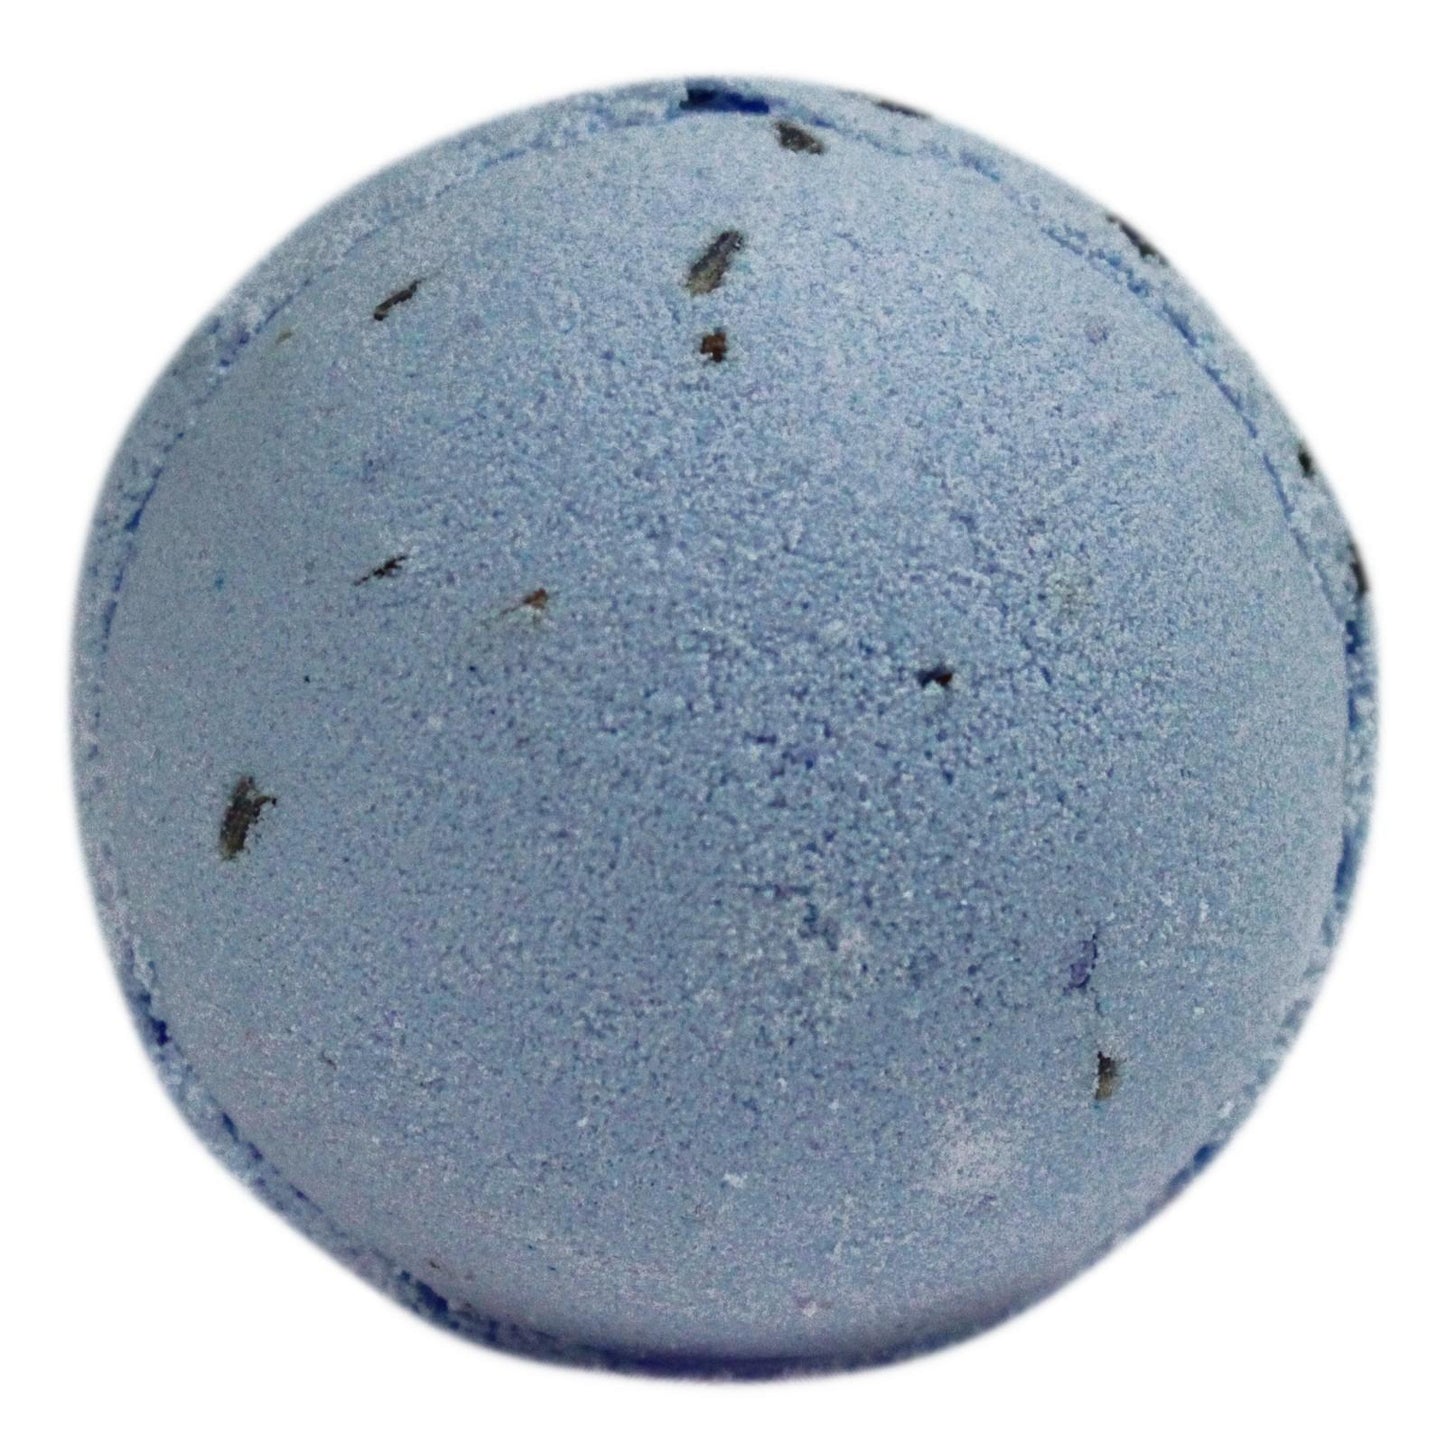 Lavender and Seeds Bath Bomb - 180g